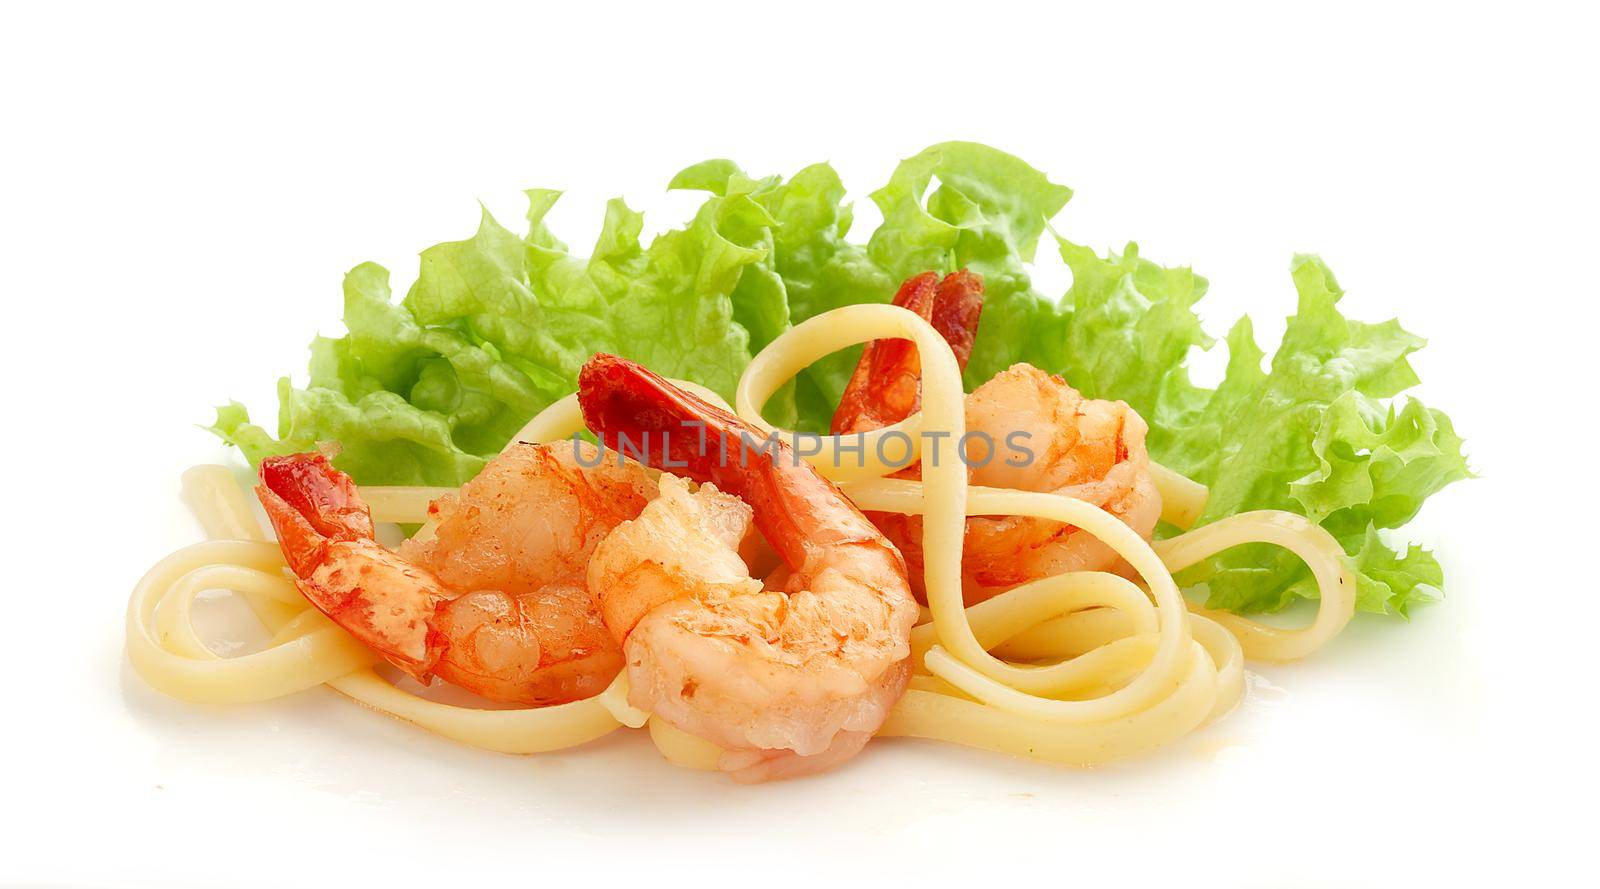 Fried shrimps and pasta by Angorius